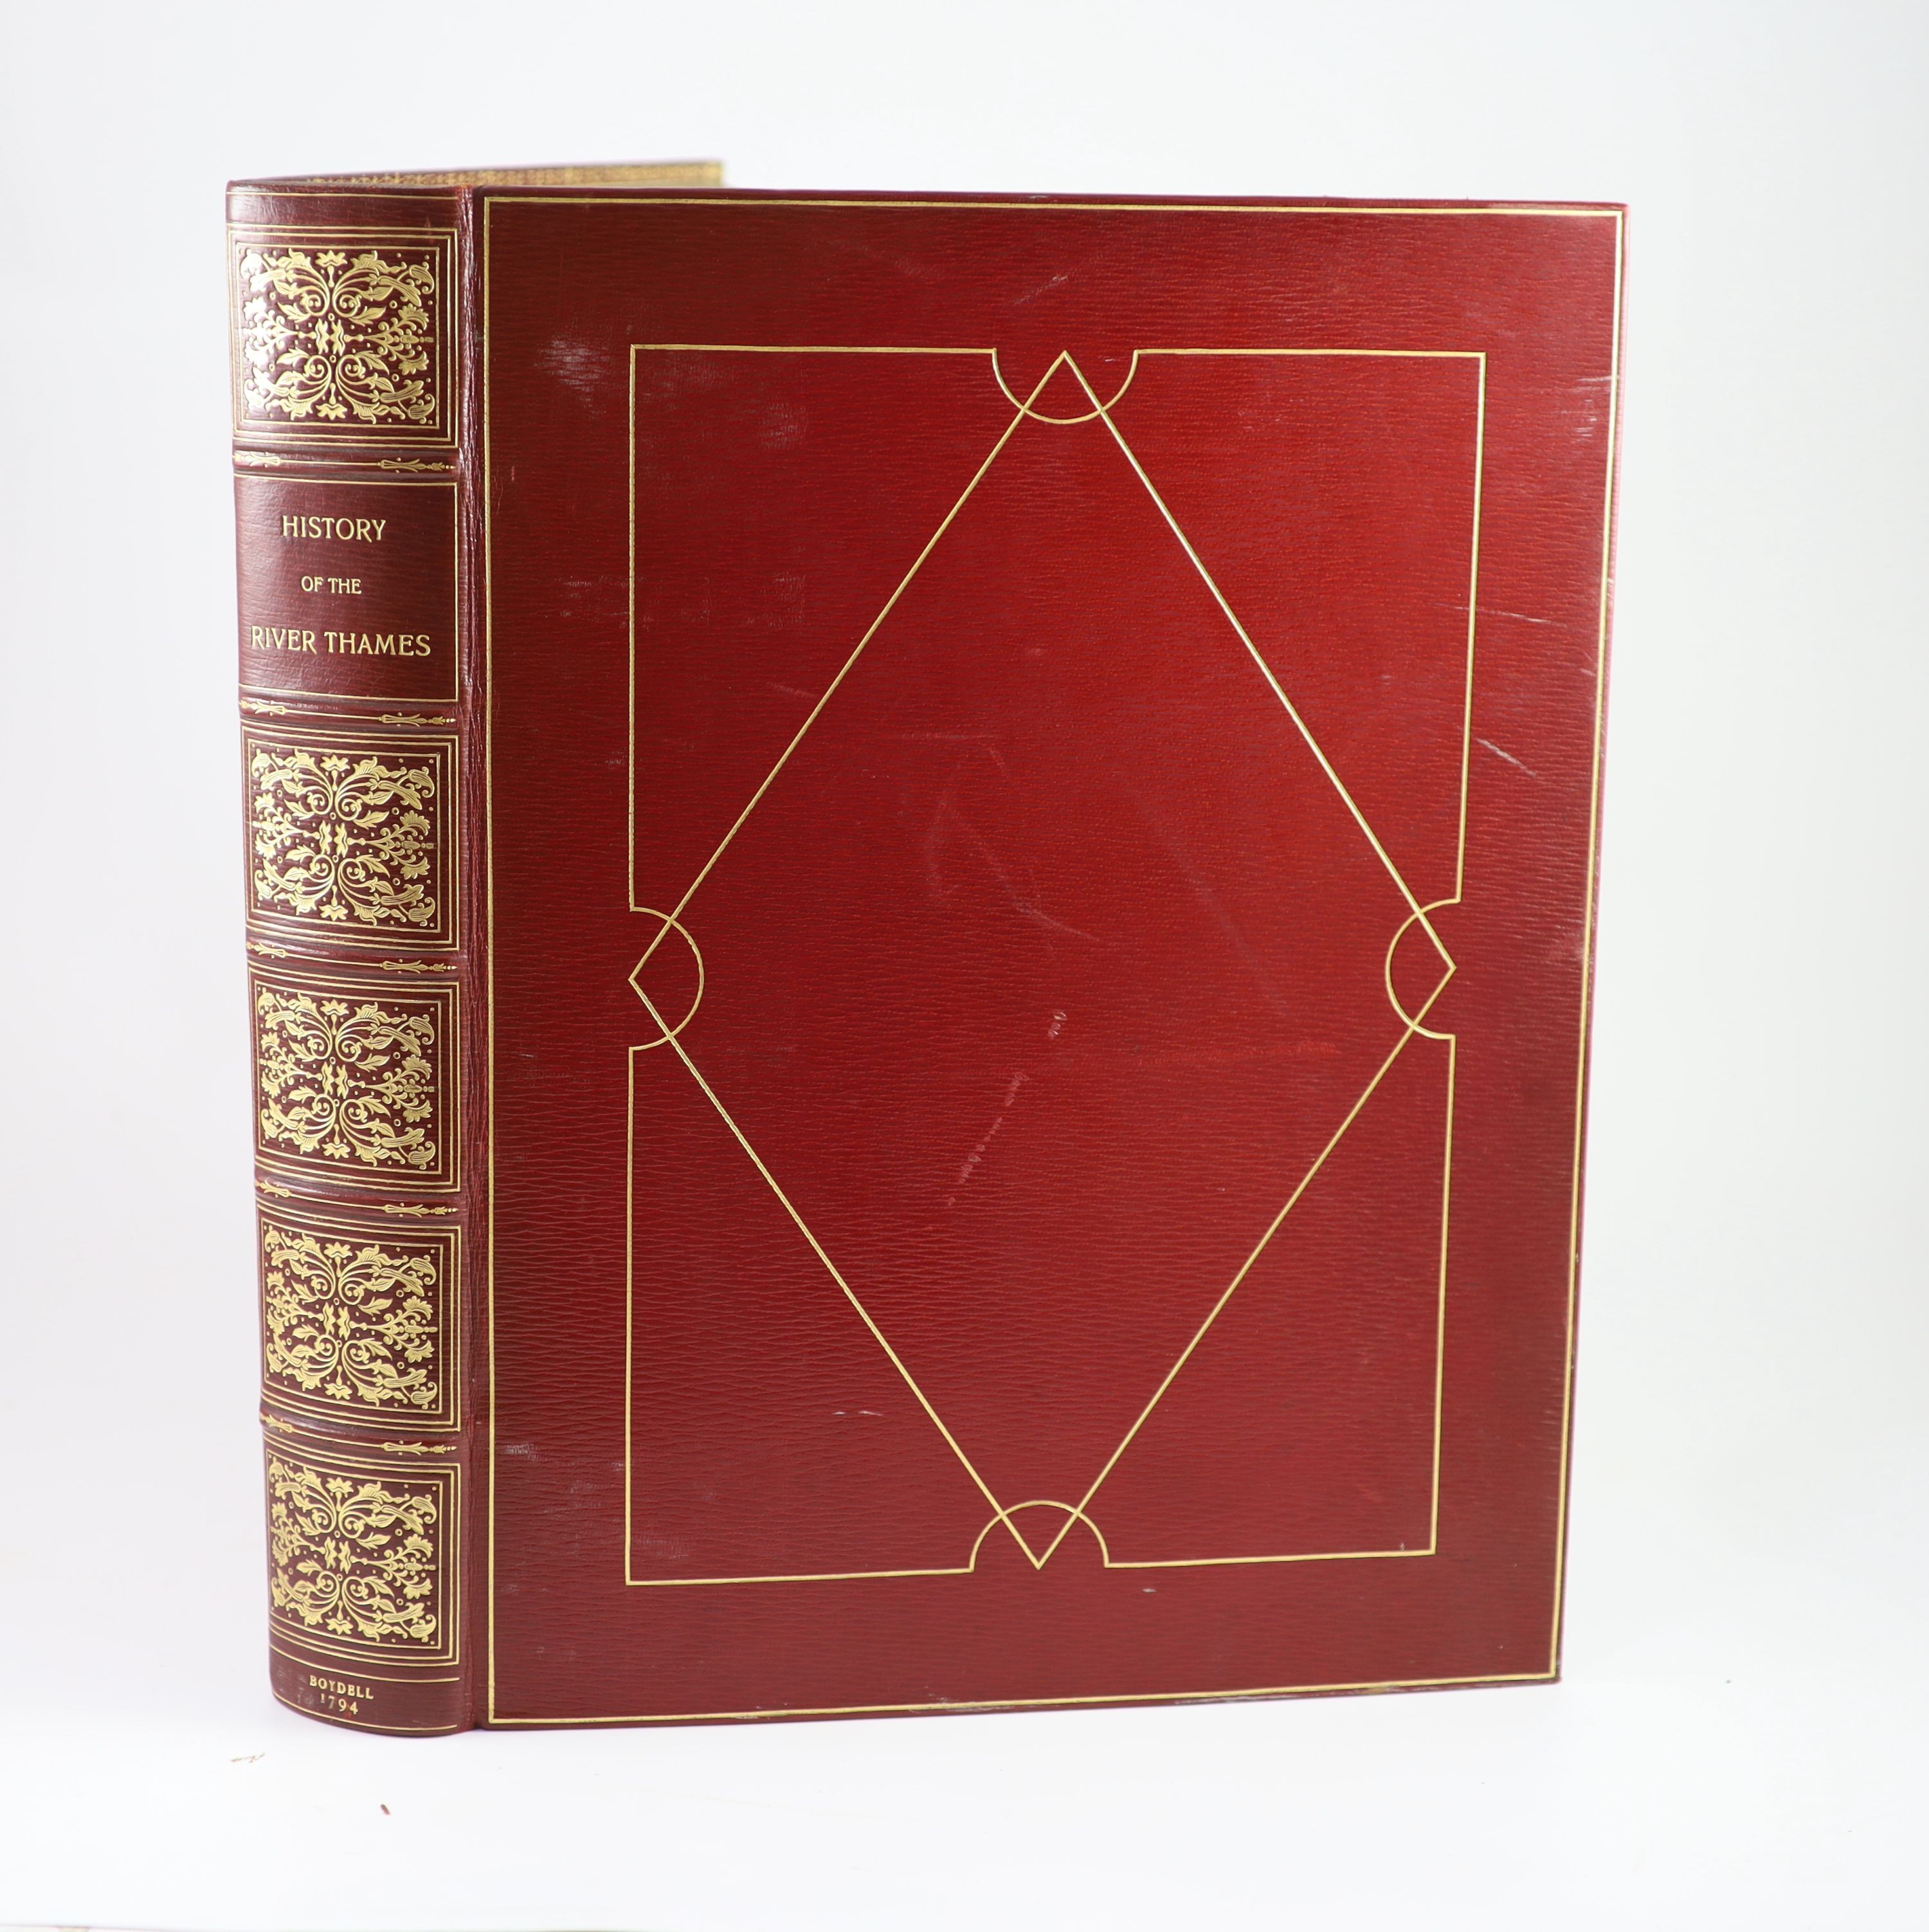 Boydell, James - Boydell, Josiah - An History of the River Thames, first edition, folio, 2 vols in 1, later red morocco gilt, illustrated by J. Farrington, with frontis, 76 hand-coloured aquatint plates and folding map,